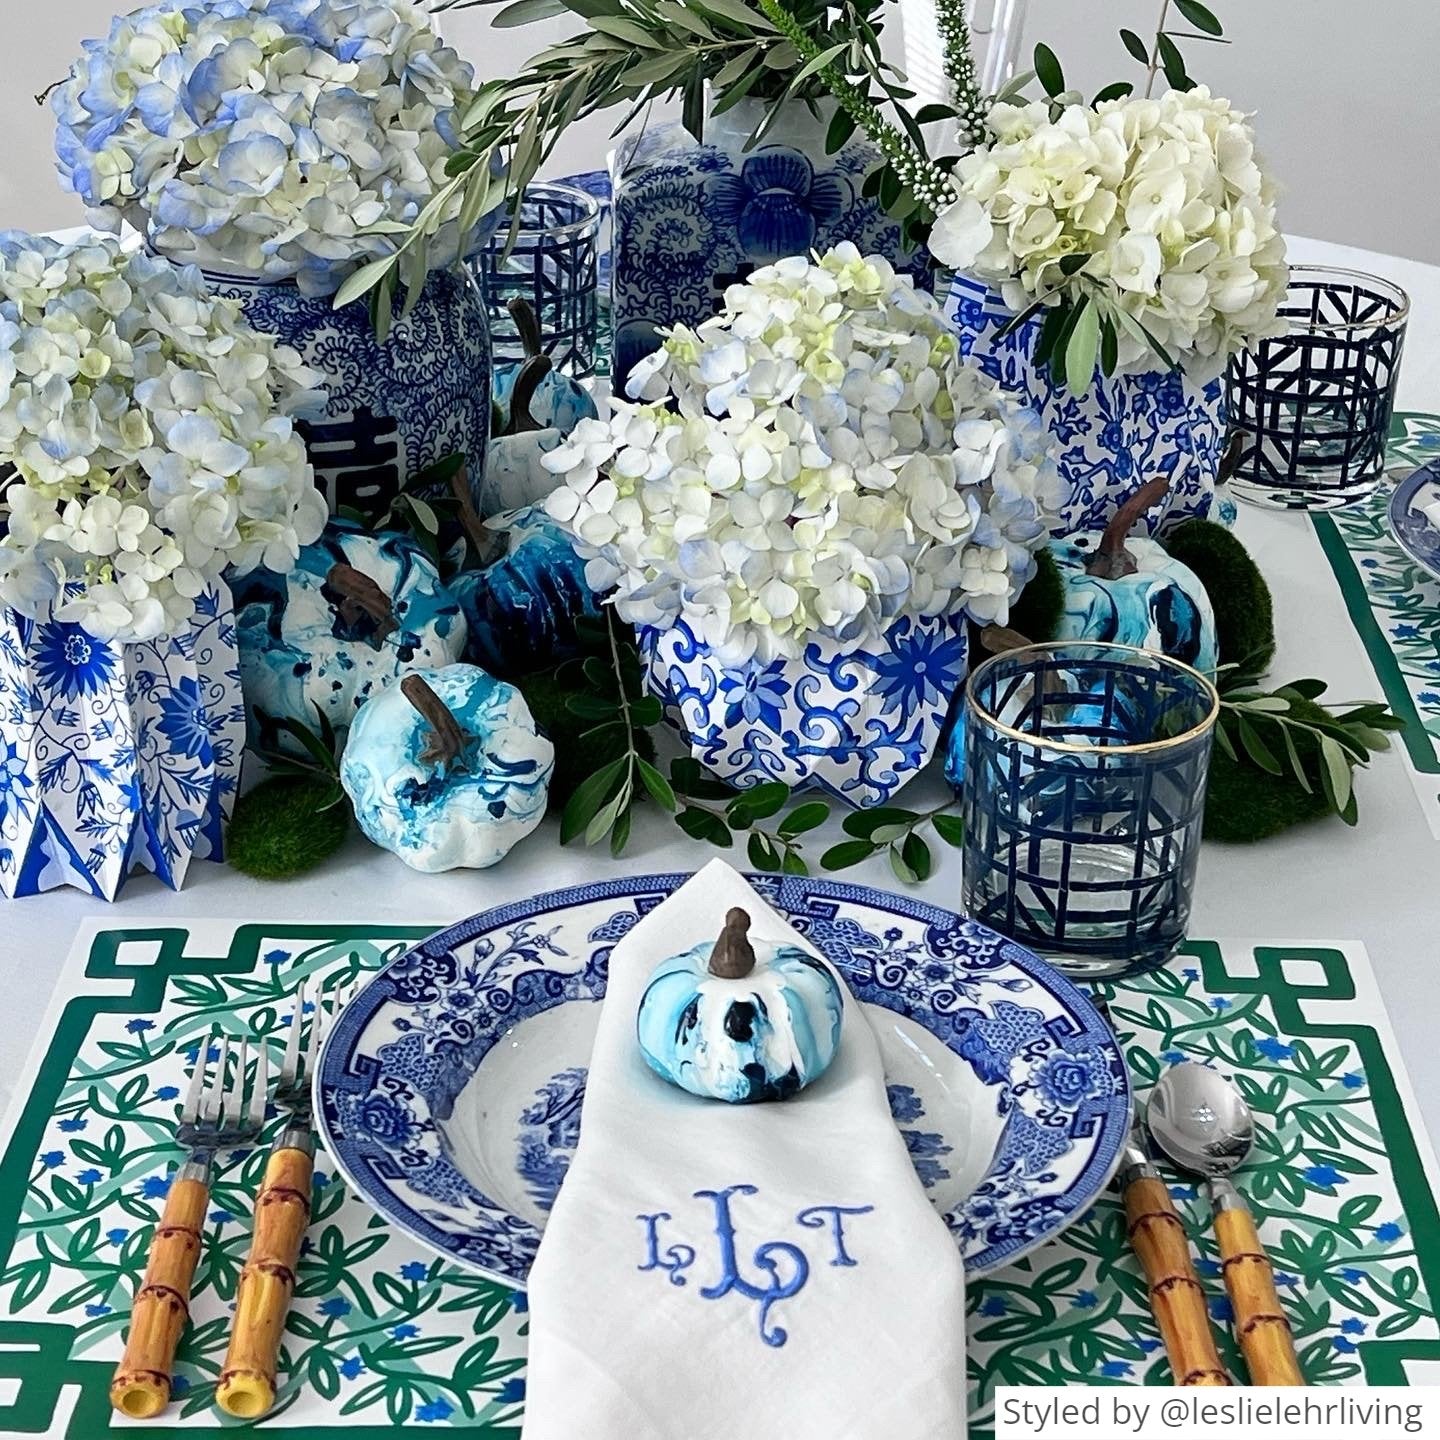 Place setting with green and white paper placemat layered with a blue and white plate, white napkin and blue mini pumpkin on a white table with blue and white vases and flowers